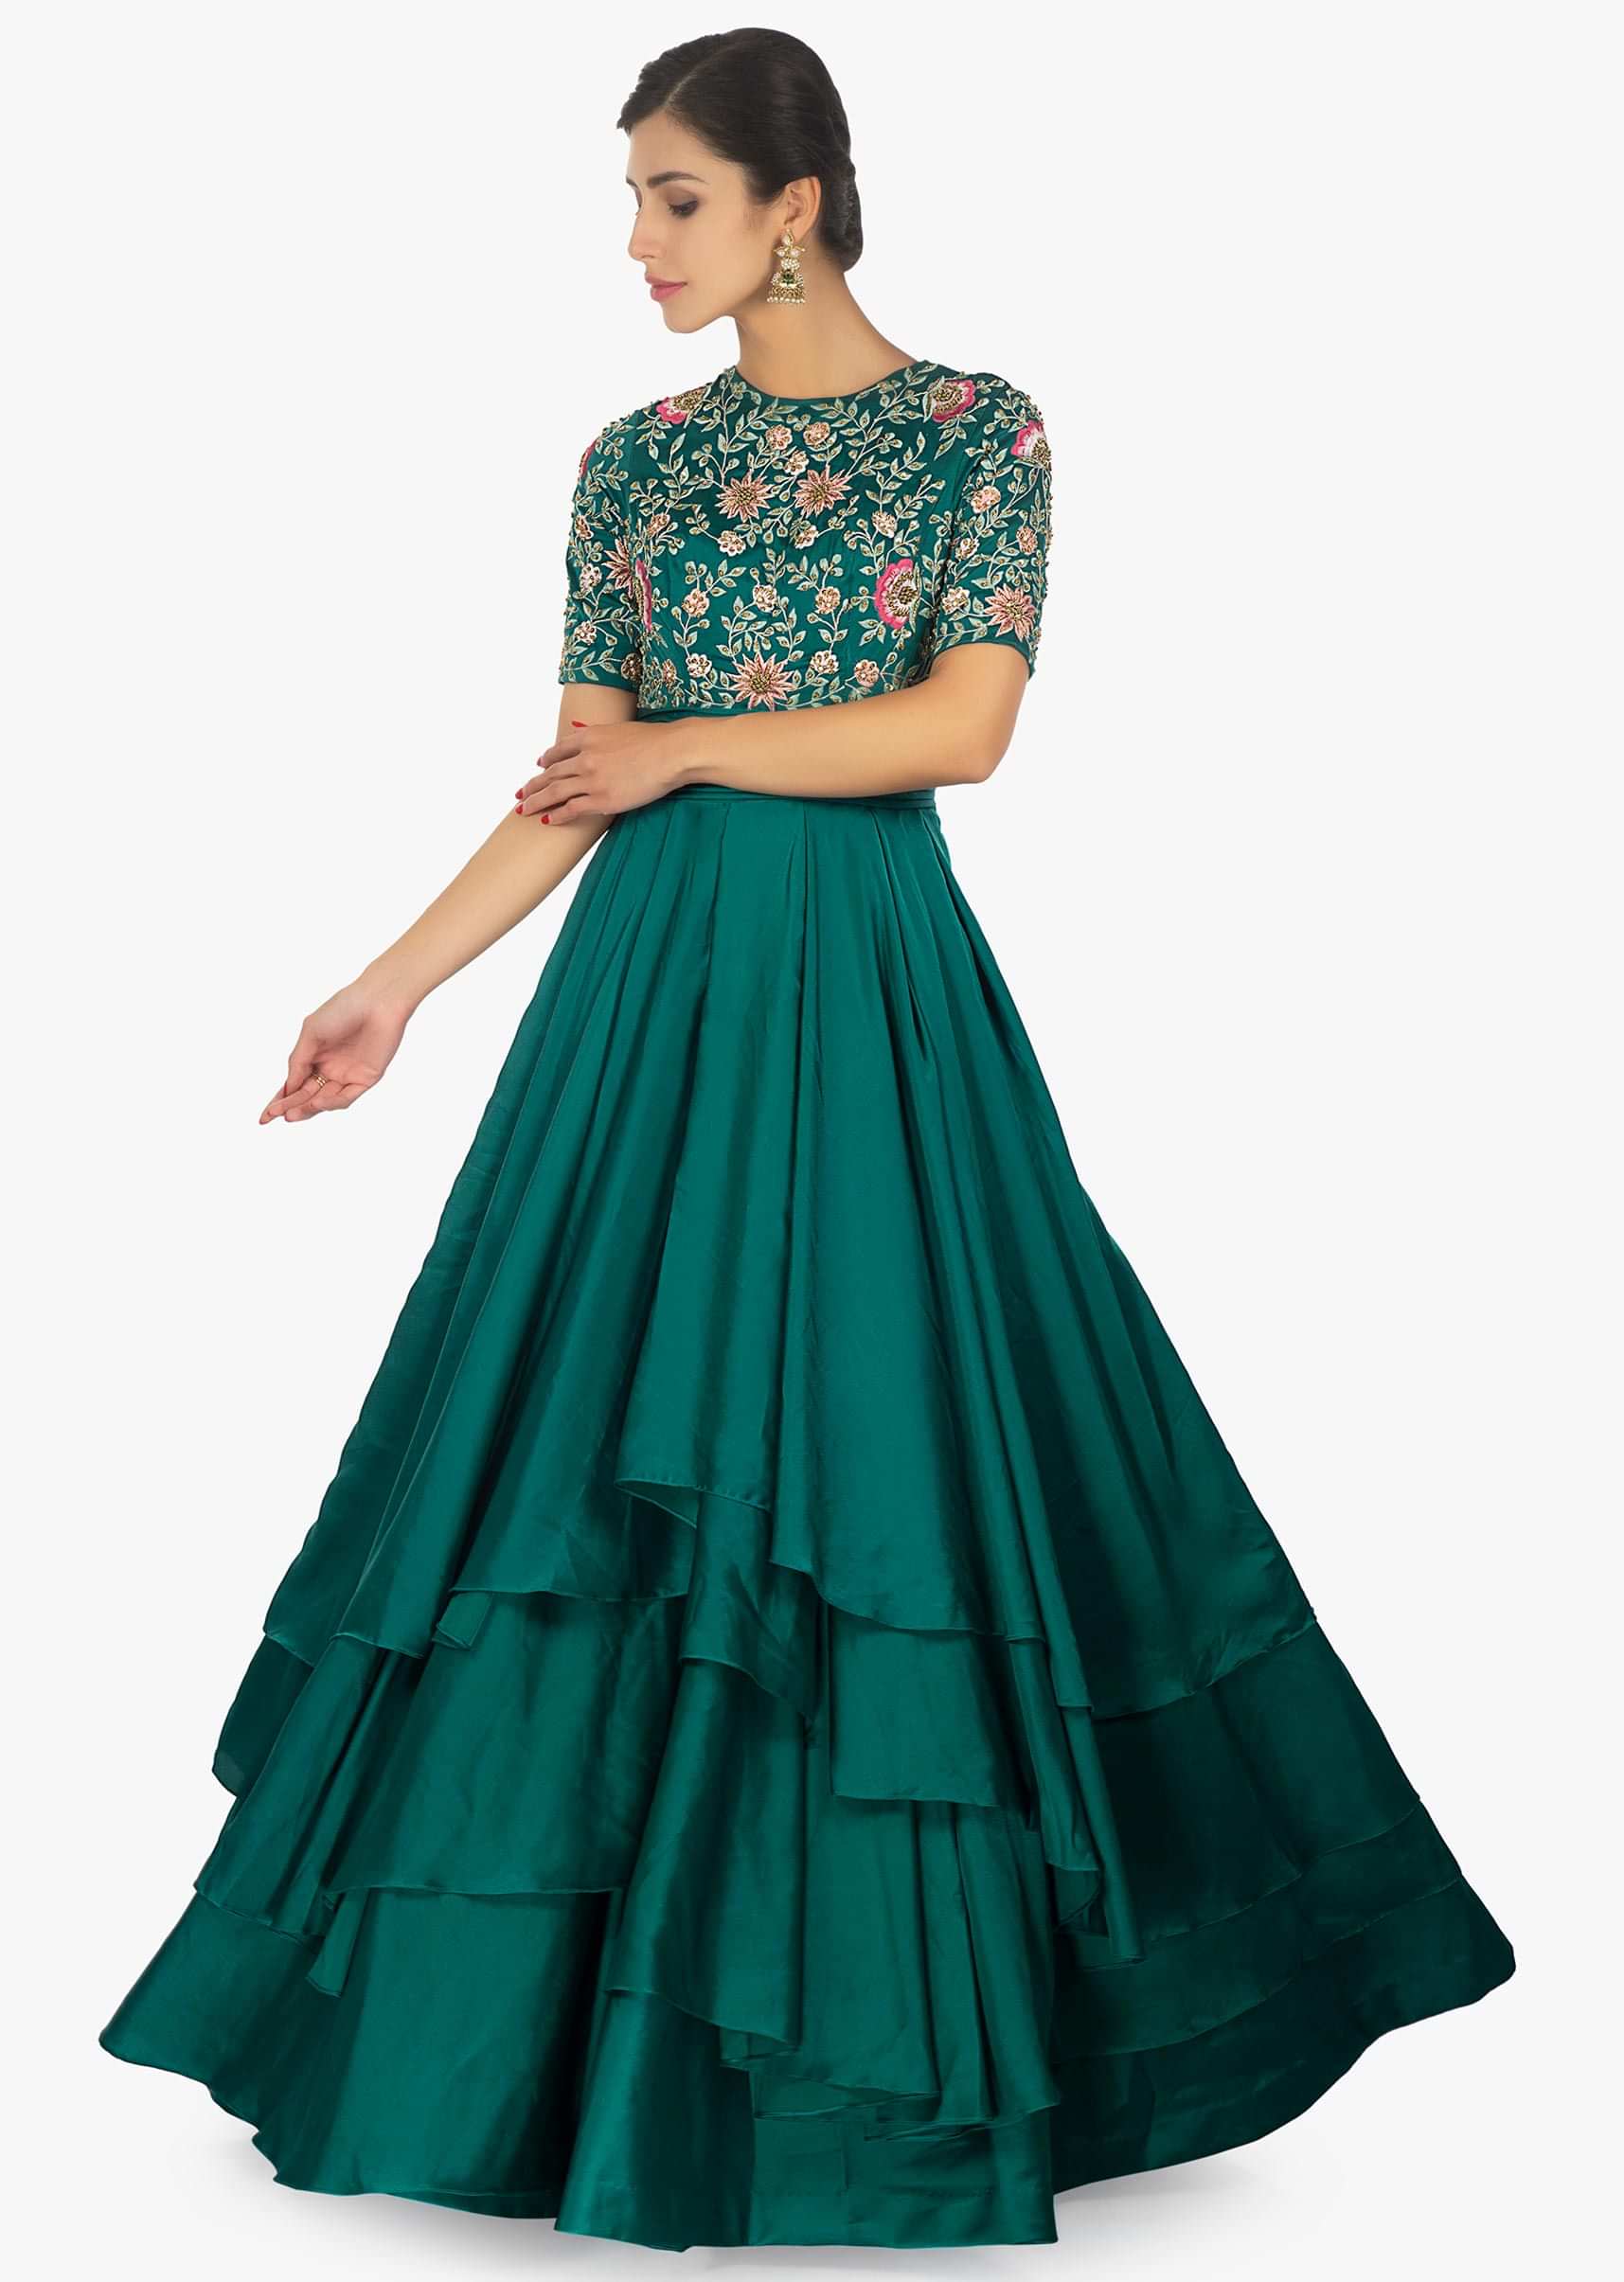 Emerald green satin layered gown with bodice in resham thread embroidery